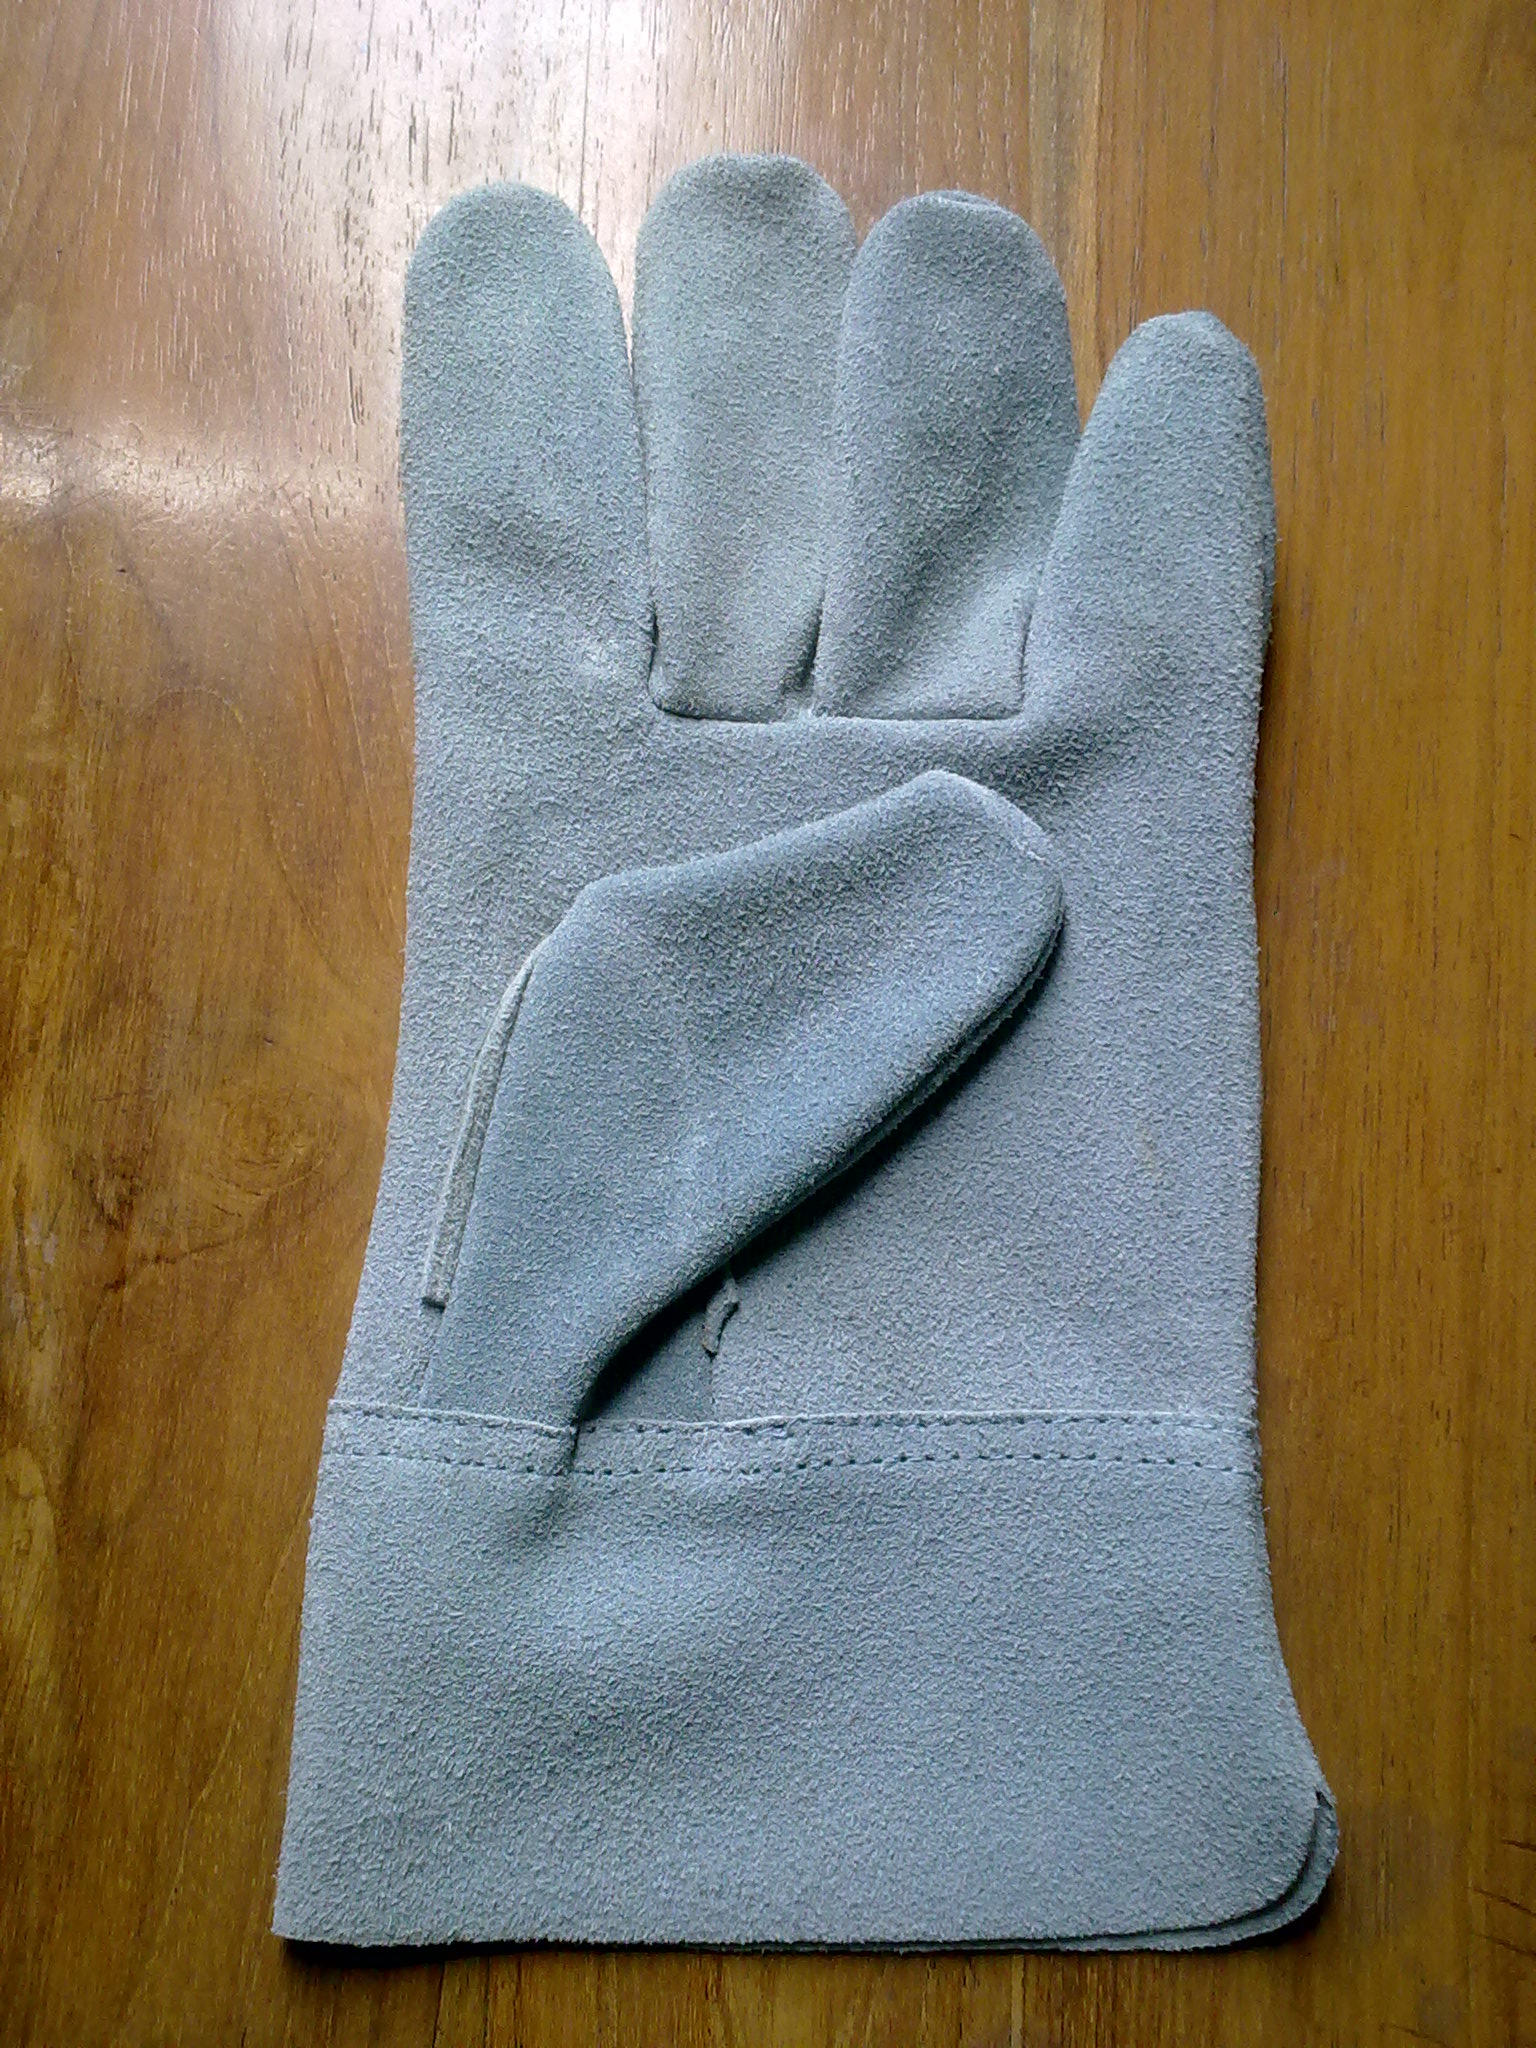 leather work gloves for sale